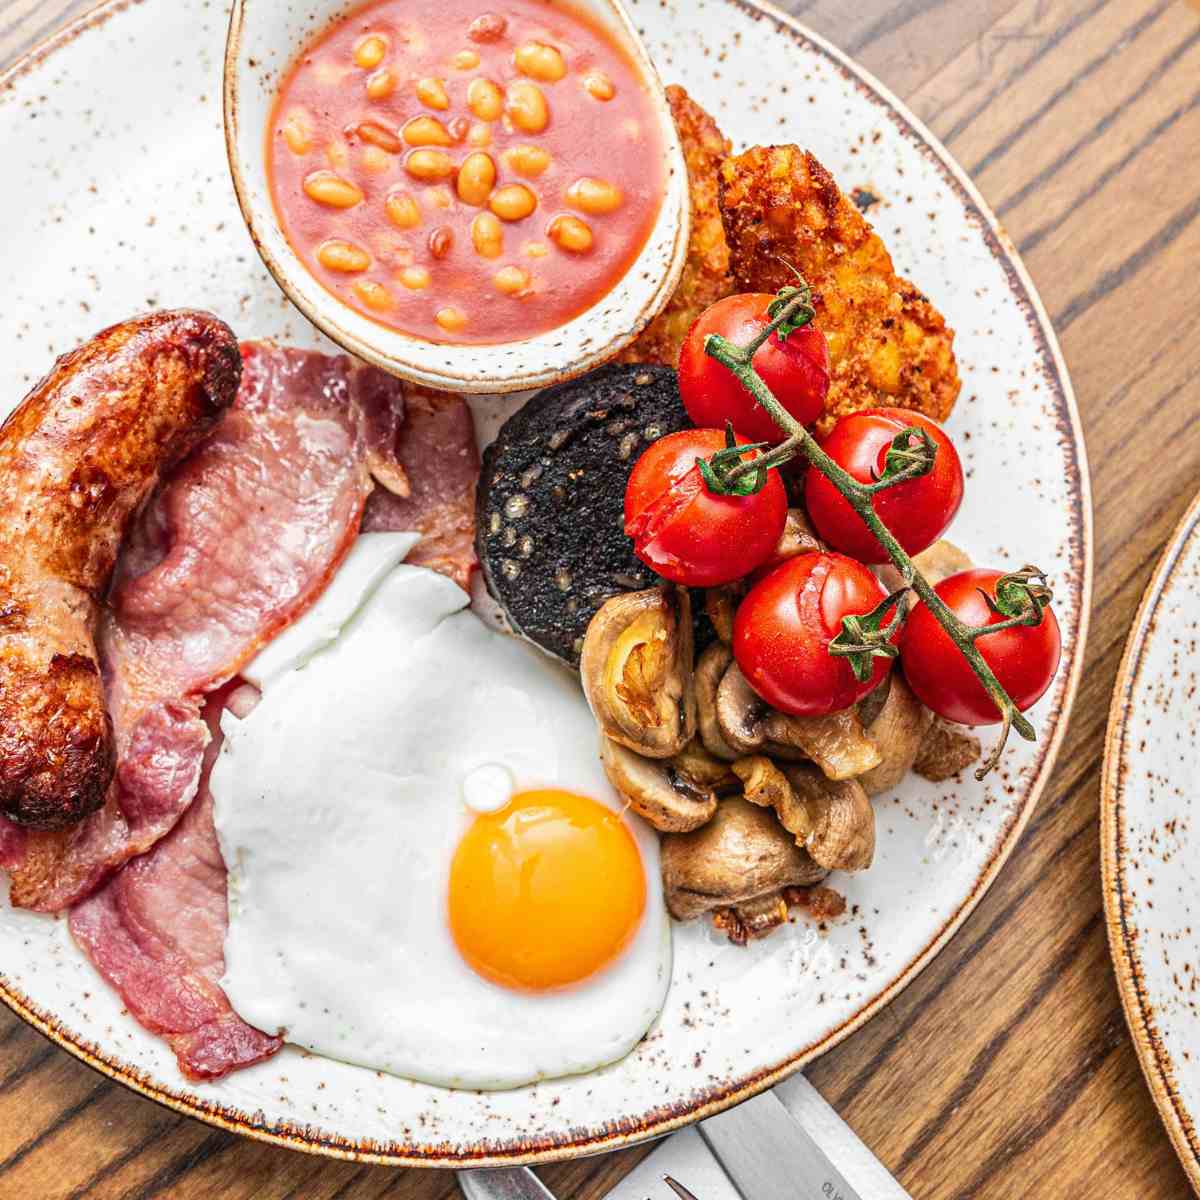 A plate of traditional Irish breakfast has black pudding under the tomatoes.